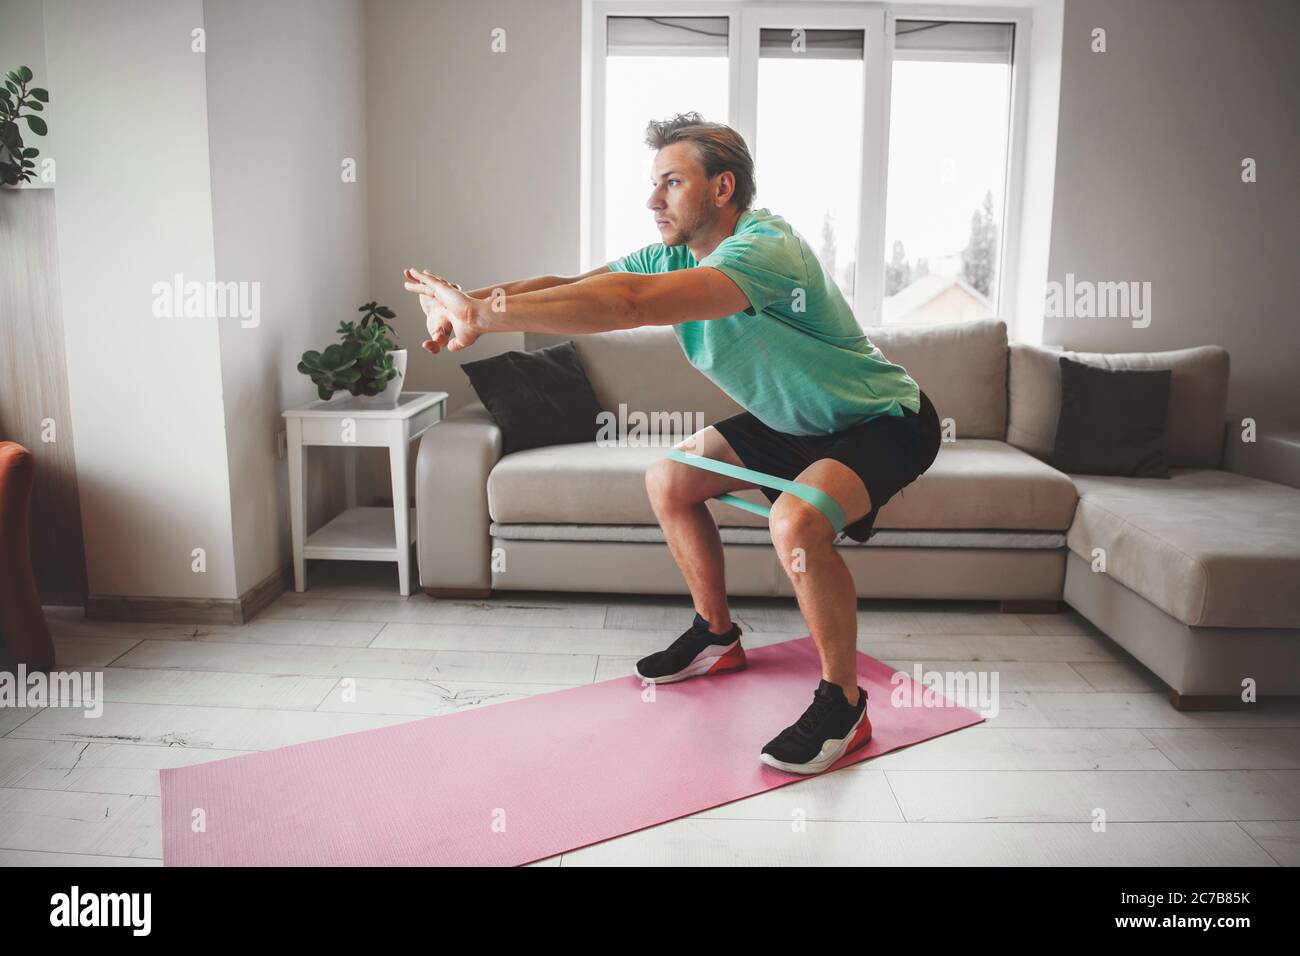 Caucasian man stretching and warming up at home while doing fitness Stock Photo